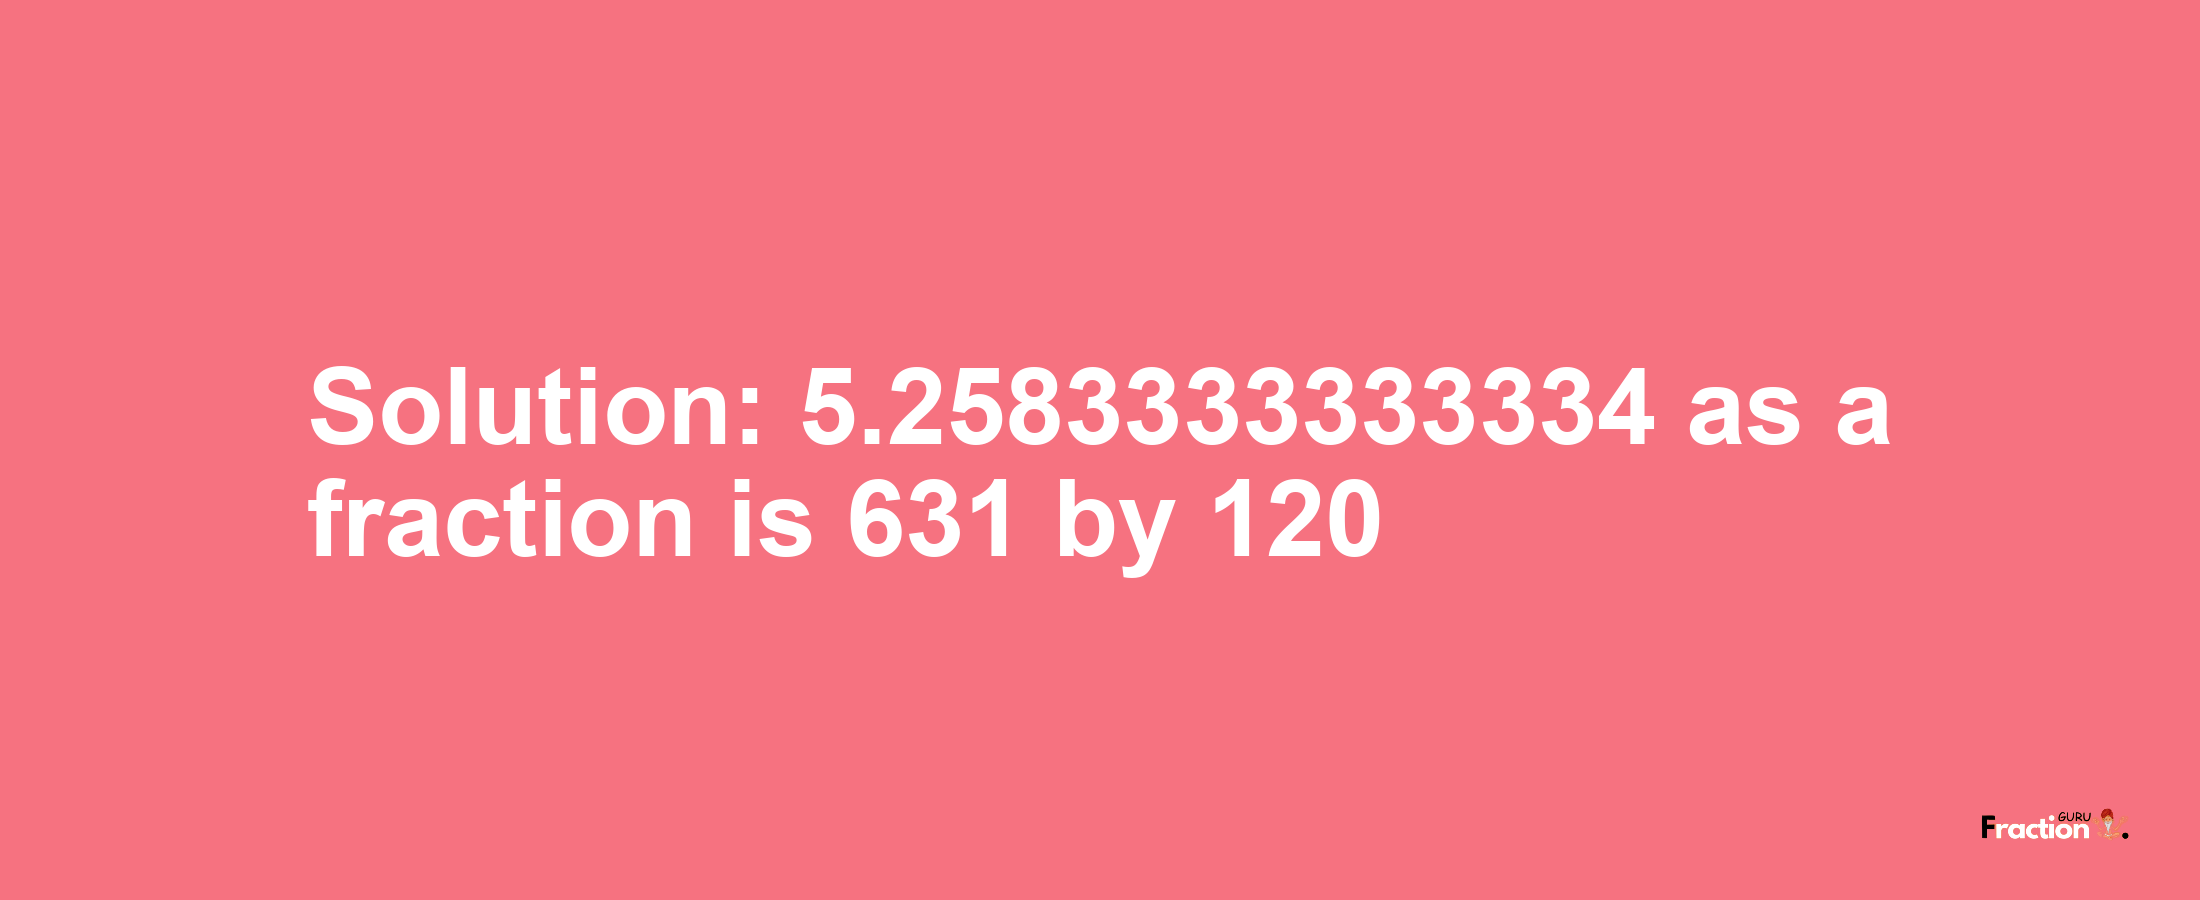 Solution:5.2583333333334 as a fraction is 631/120